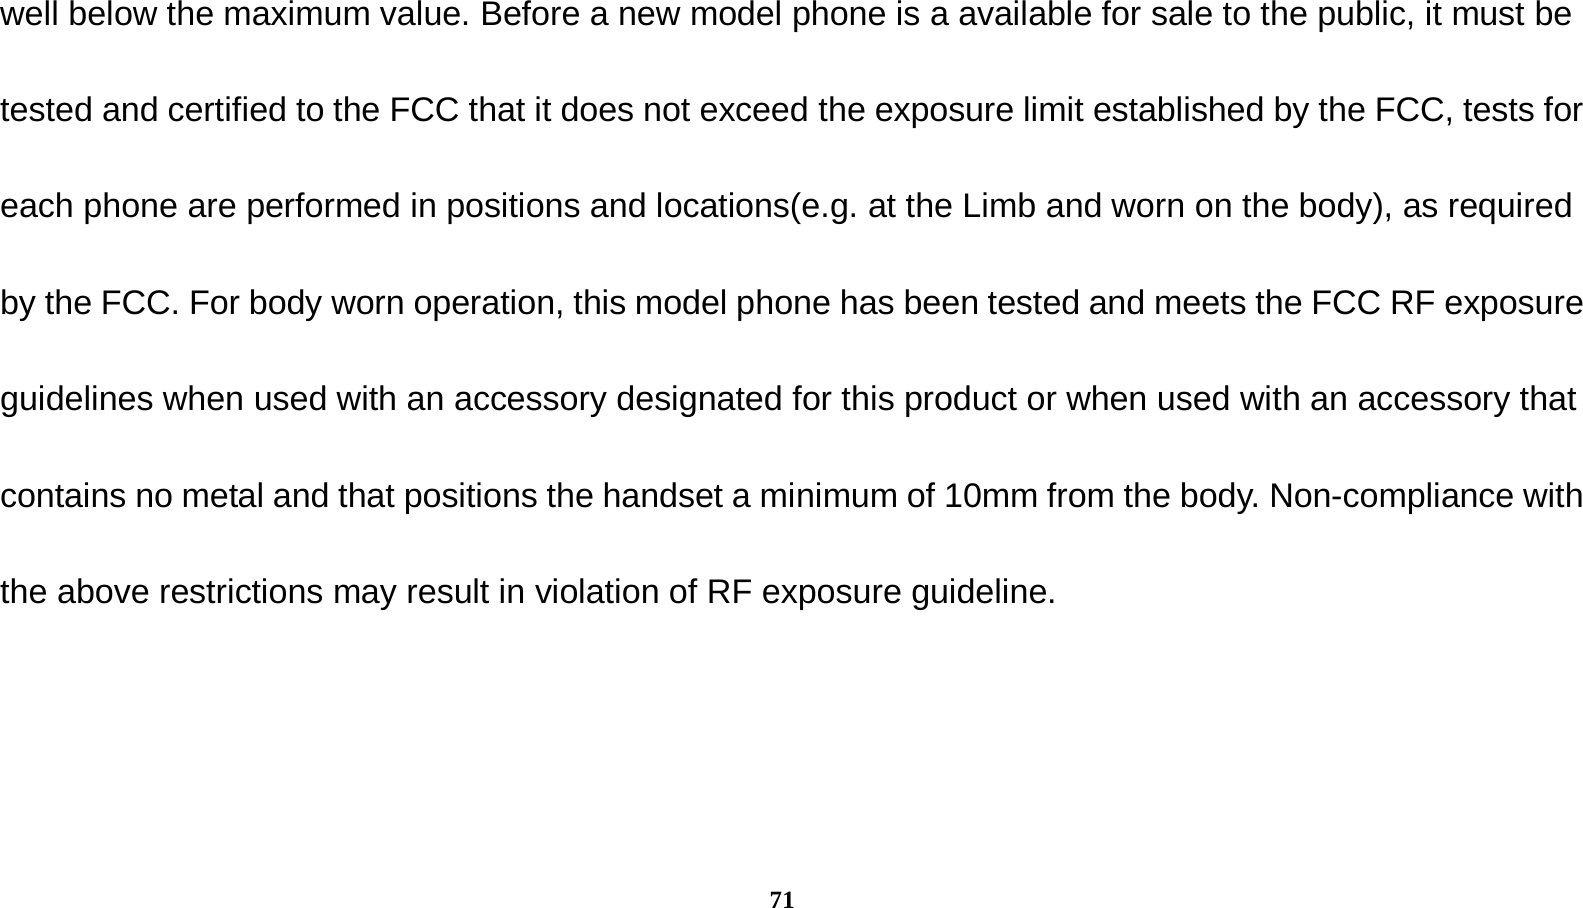  71 well below the maximum value. Before a new model phone is a available for sale to the public, it must be tested and certified to the FCC that it does not exceed the exposure limit established by the FCC, tests for each phone are performed in positions and locations(e.g. at the Limb and worn on the body), as required by the FCC. For body worn operation, this model phone has been tested and meets the FCC RF exposure guidelines when used with an accessory designated for this product or when used with an accessory that contains no metal and that positions the handset a minimum of 10mm from the body. Non-compliance with the above restrictions may result in violation of RF exposure guideline. 